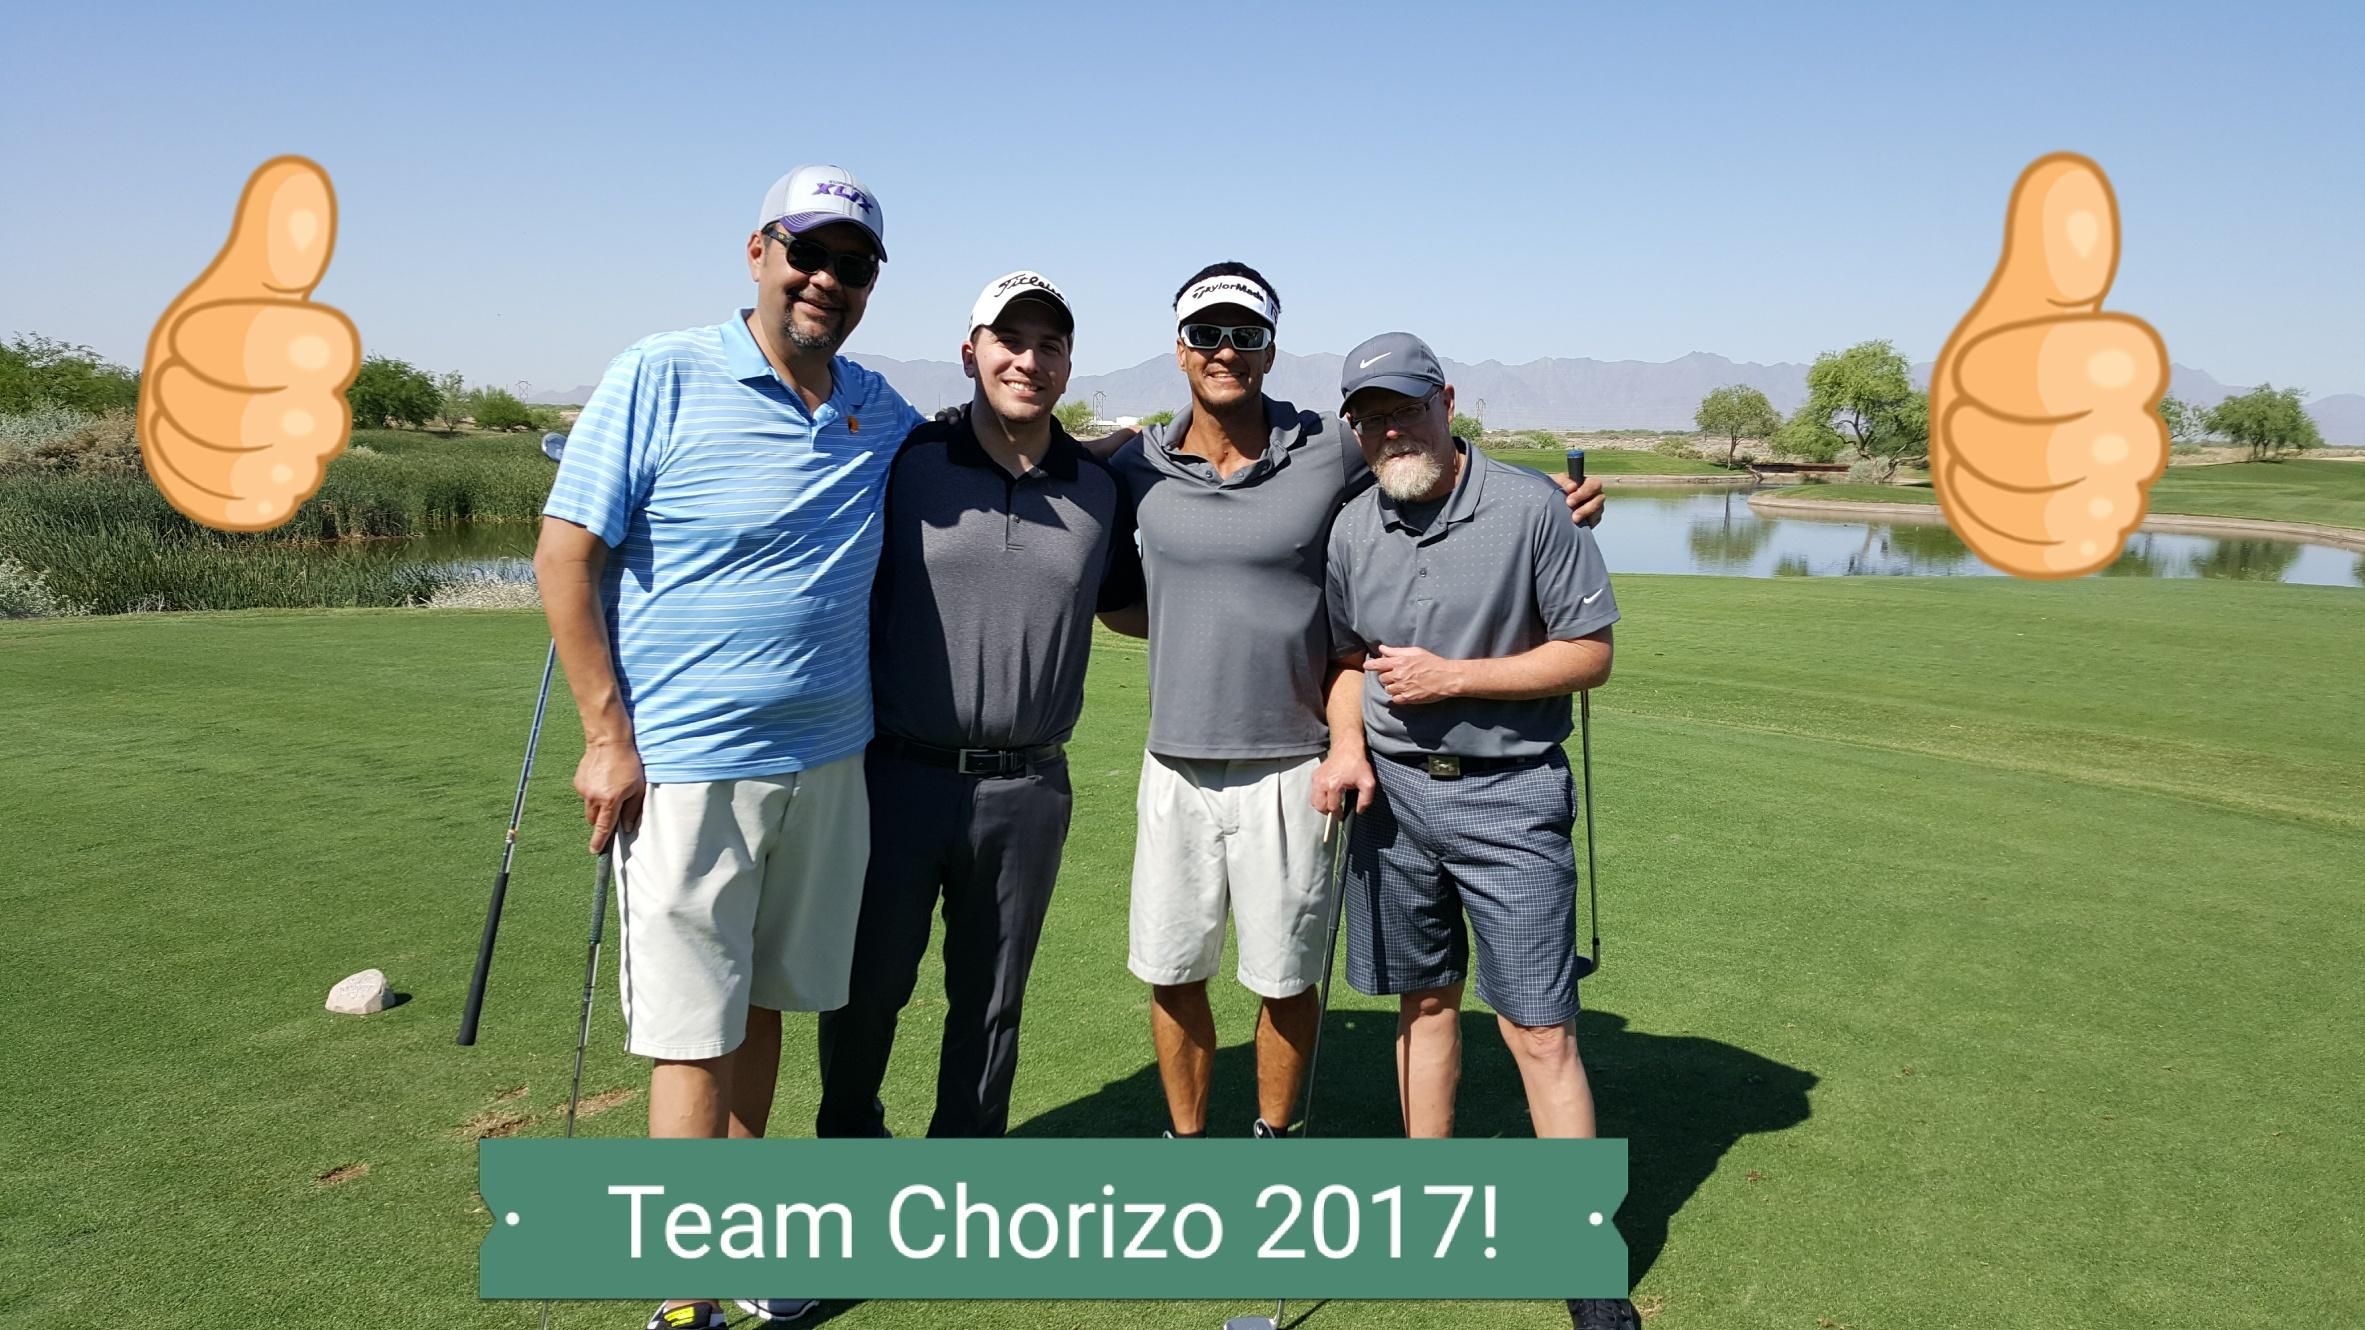 Core Consulting Group Inc., for the 6th straight year, sponsored the “Margarita Hole” at the AADC 22nd Annual Barry Fish Memorial Golf Tournament